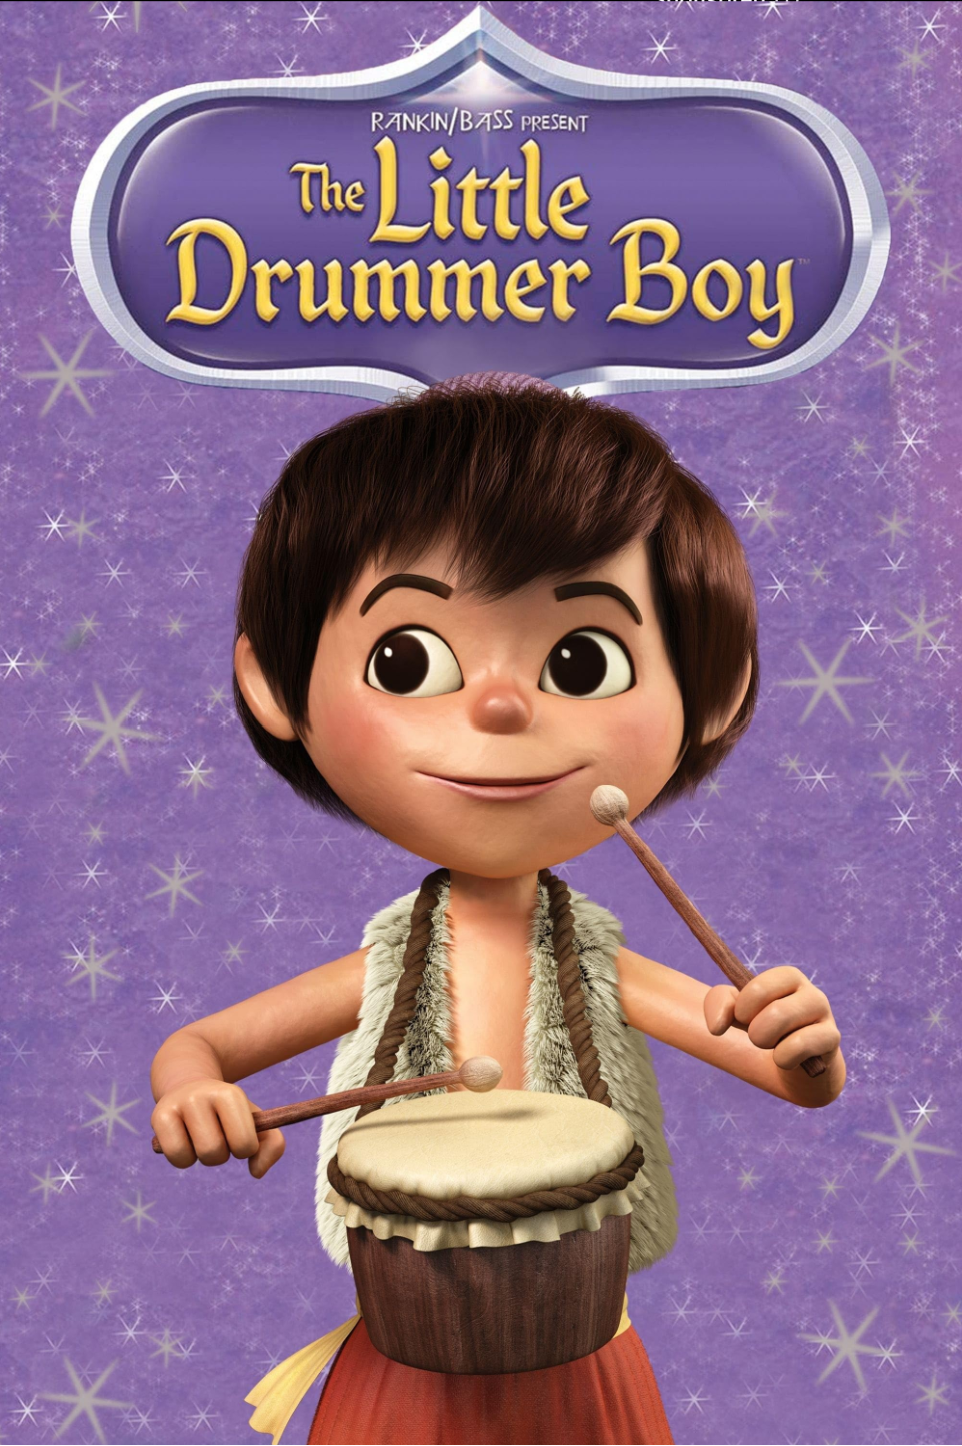 the little drummer boy movie poster with a boy and a drum